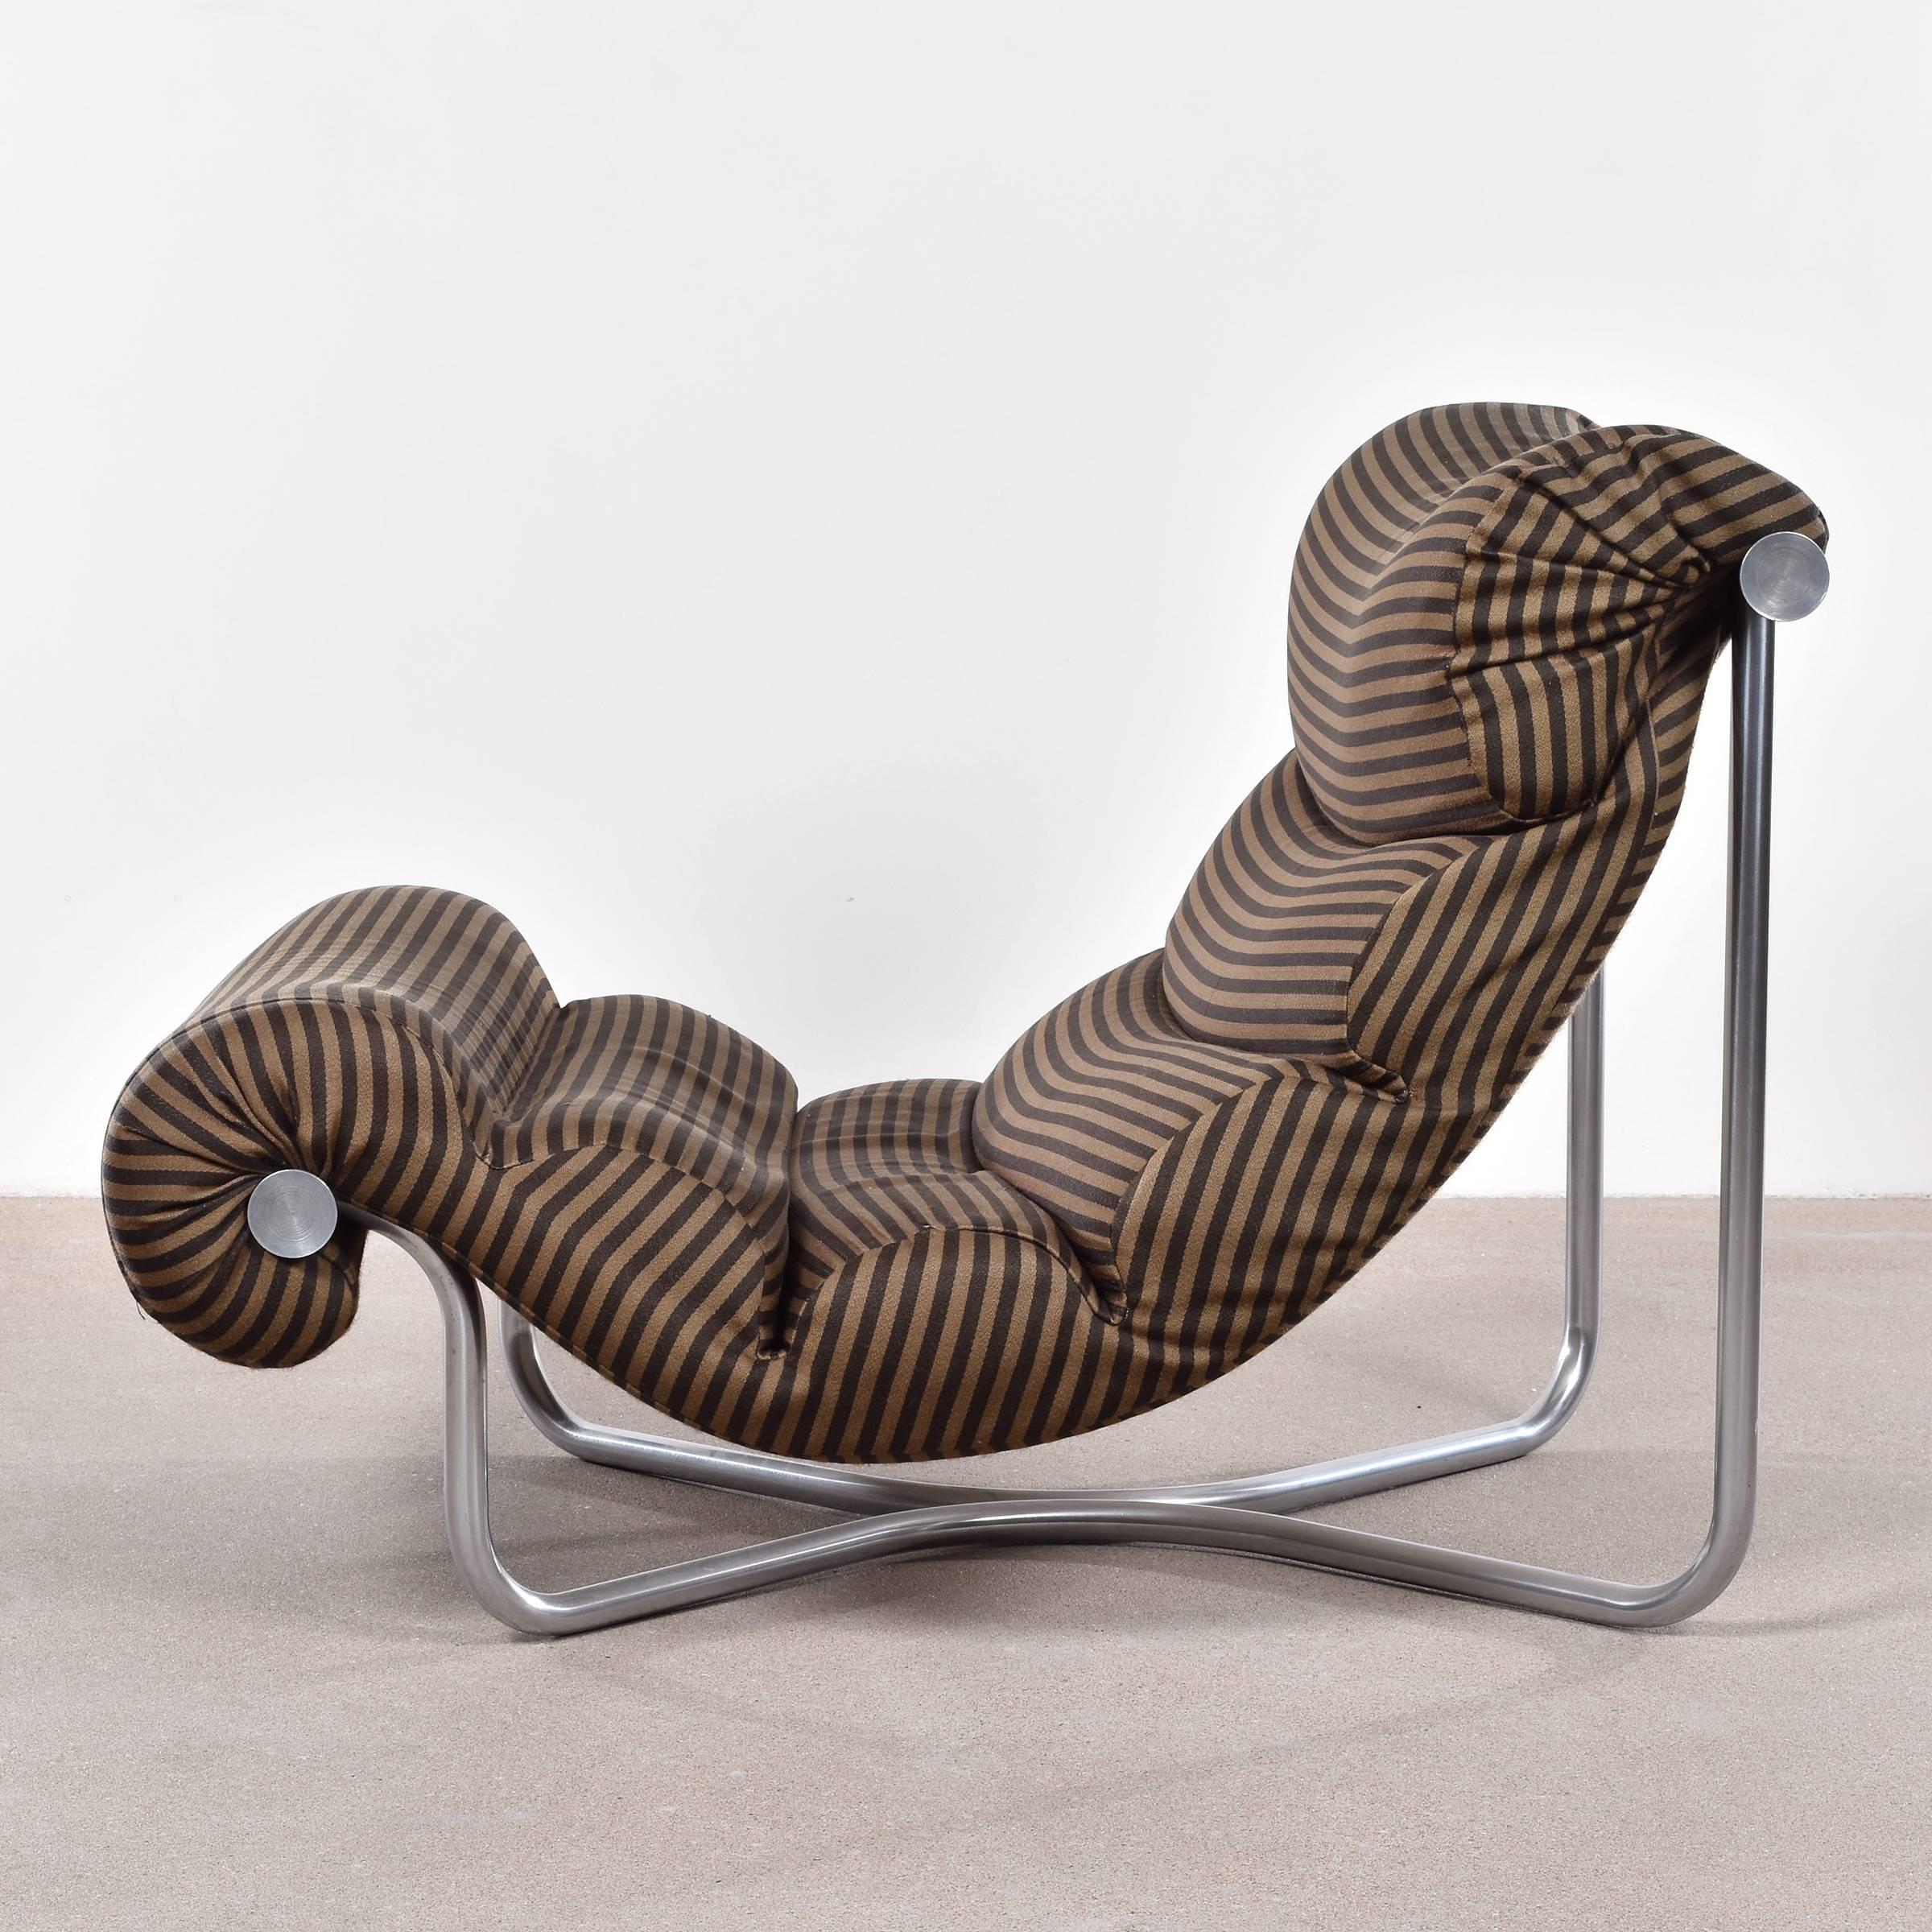 Comfortable modernist lounge chair designed by Georges van Rijck for Beaufort, Belgium. Floating segmented fabric cushions hold by chromed cross shaped frame. All in original condition.
The chair can be newly upholstered if desired, contact us for